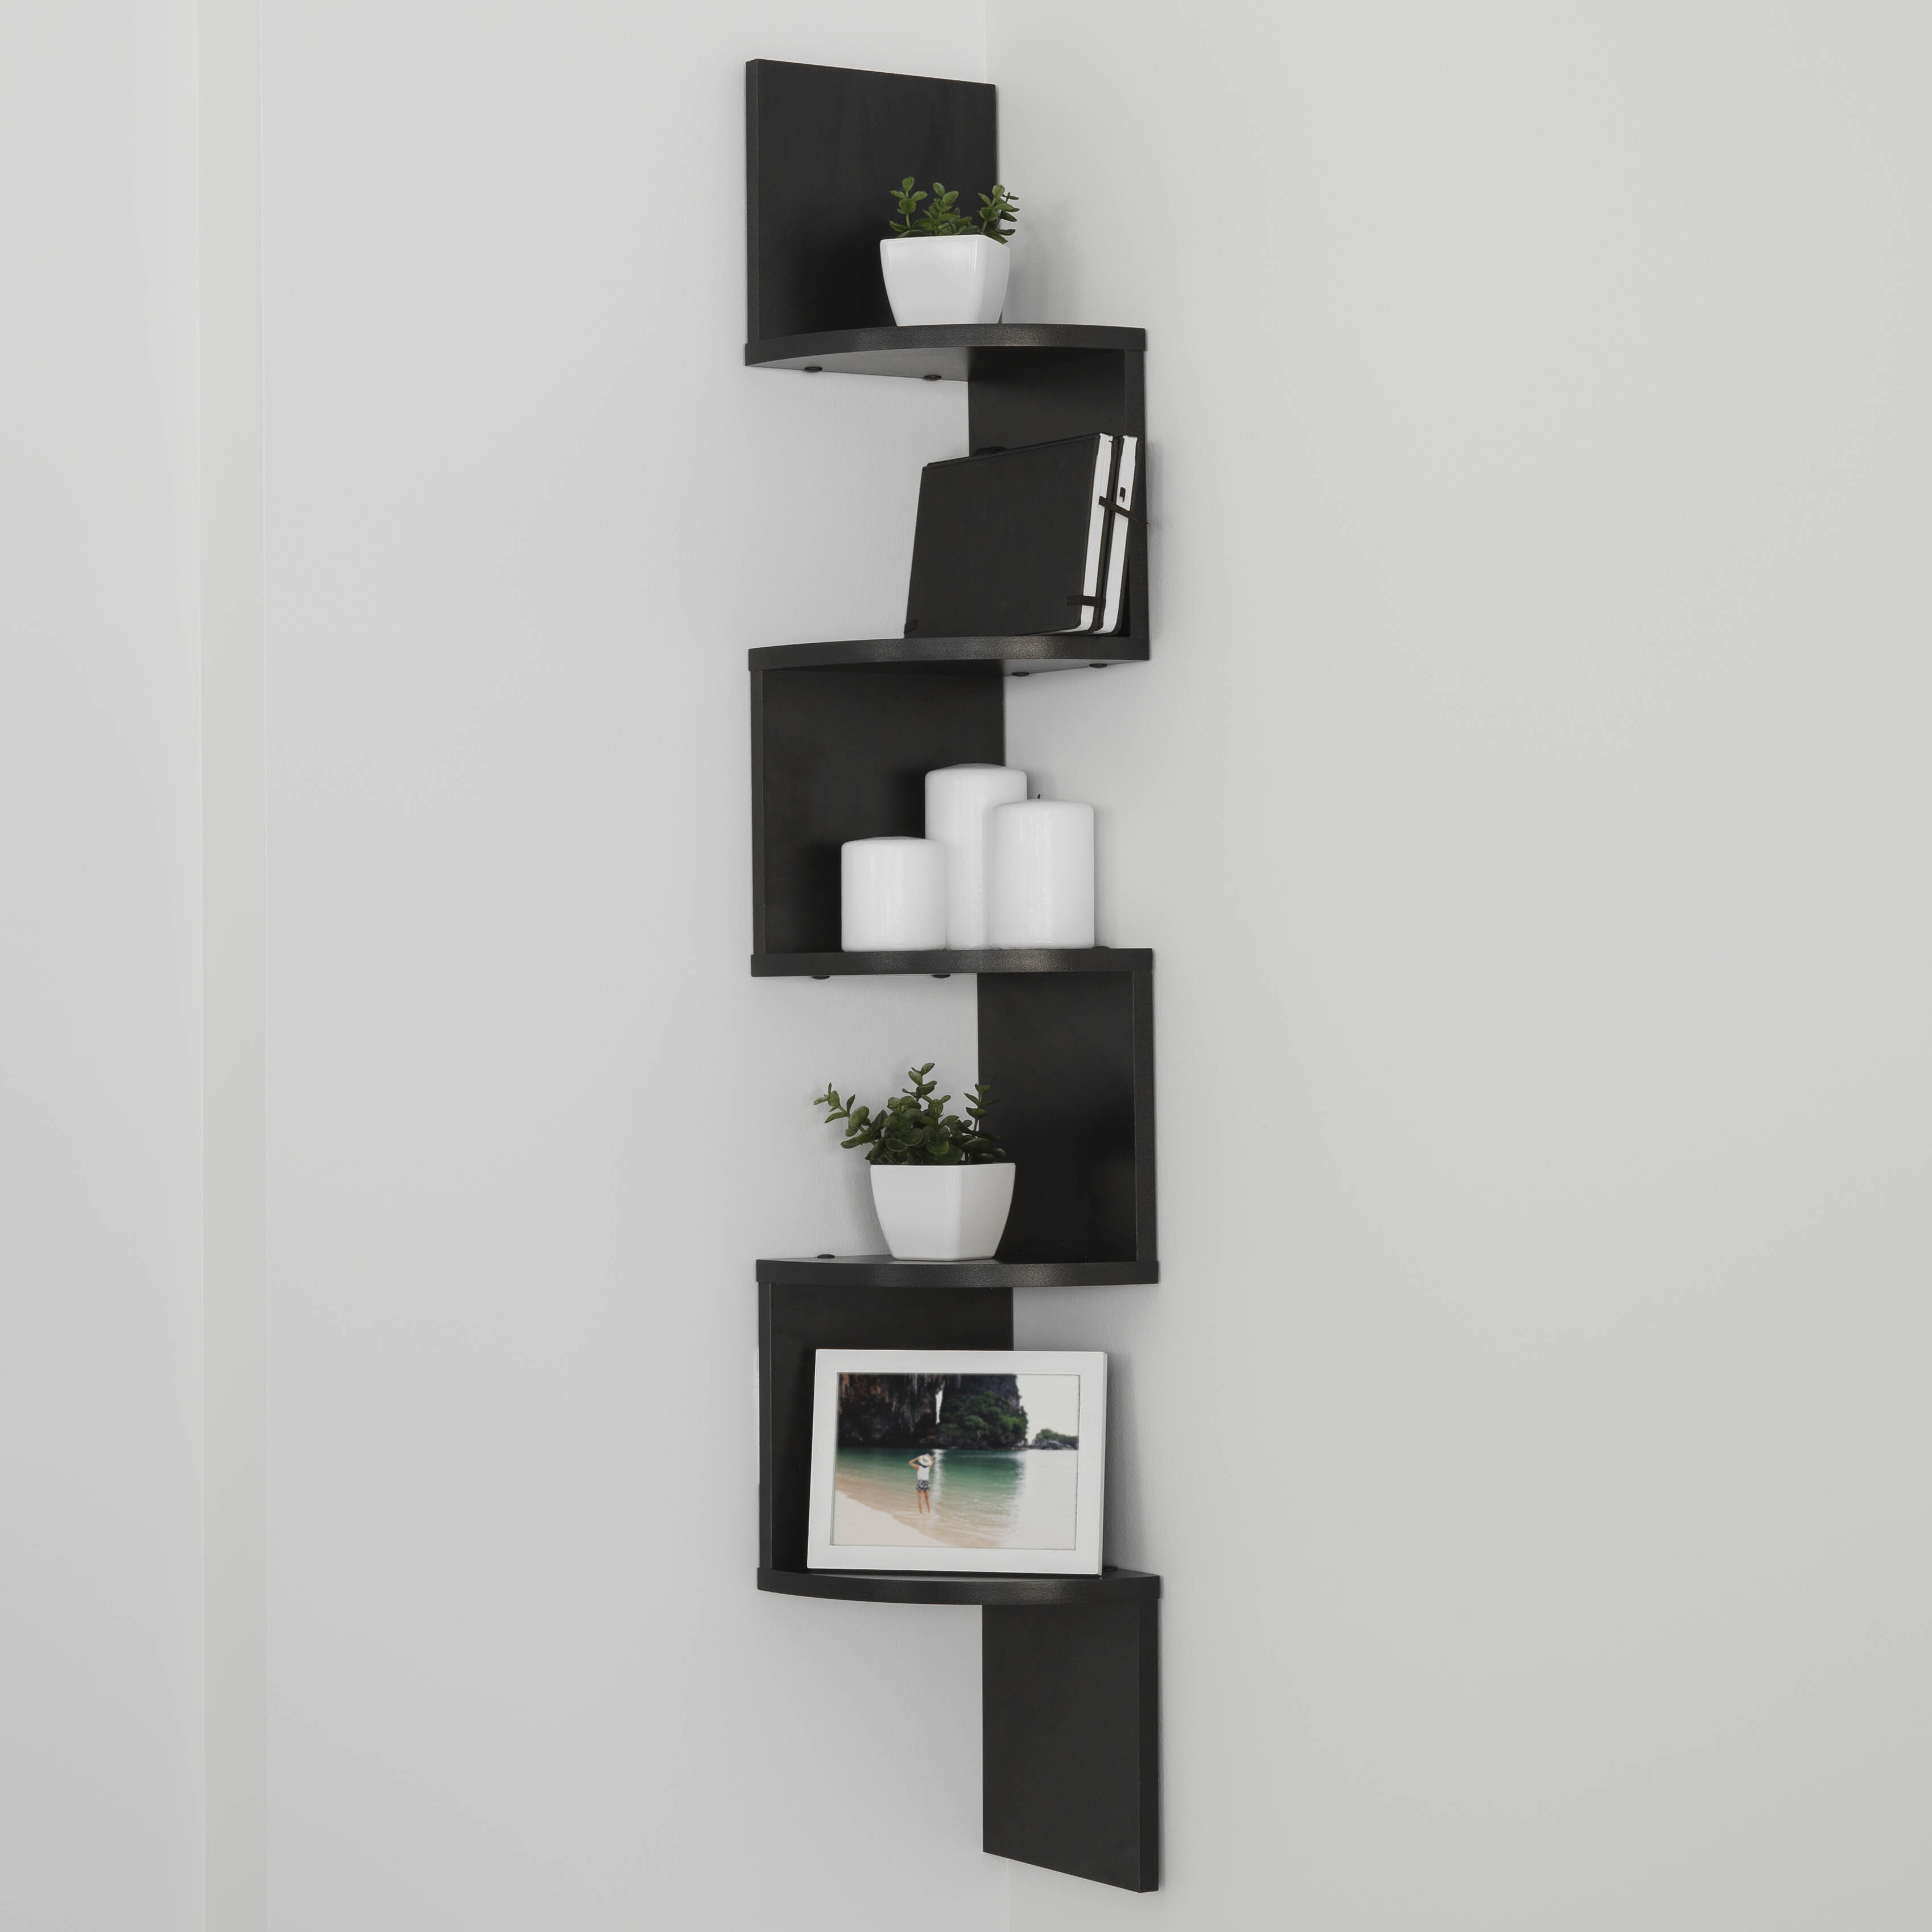 Details about   Wood Floating Display2-Tier Shelves Wall Mount Storage Bookshelf for Home Decor 